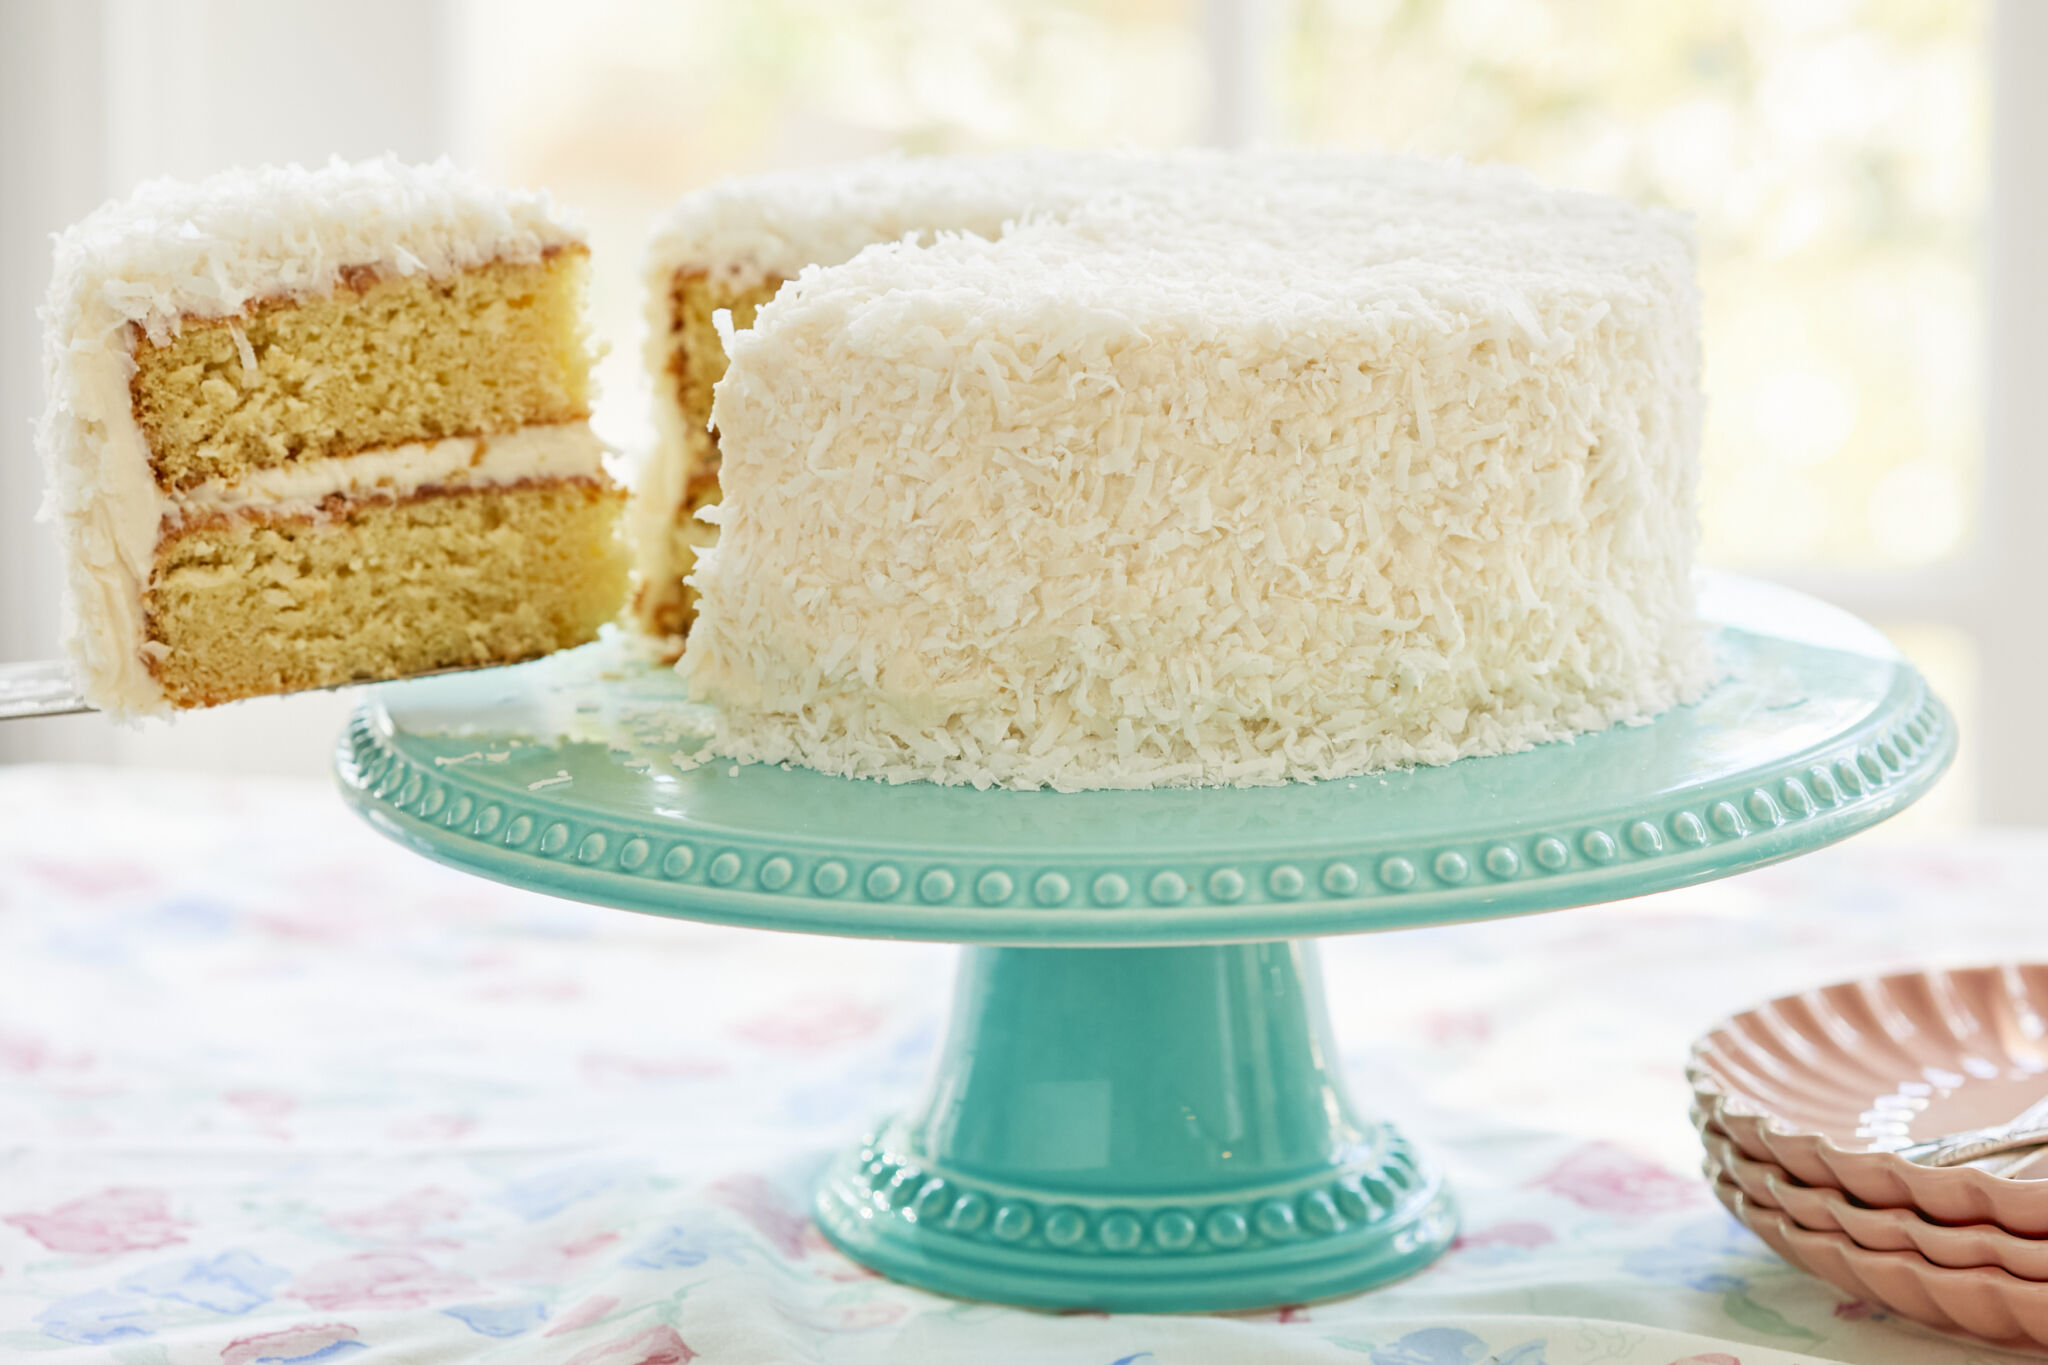 A slice was cut from and being lifted off the perfectly baked two-layer moist coconut cake, with white frosting between layers and on the outside, covered with crunchy coconut.